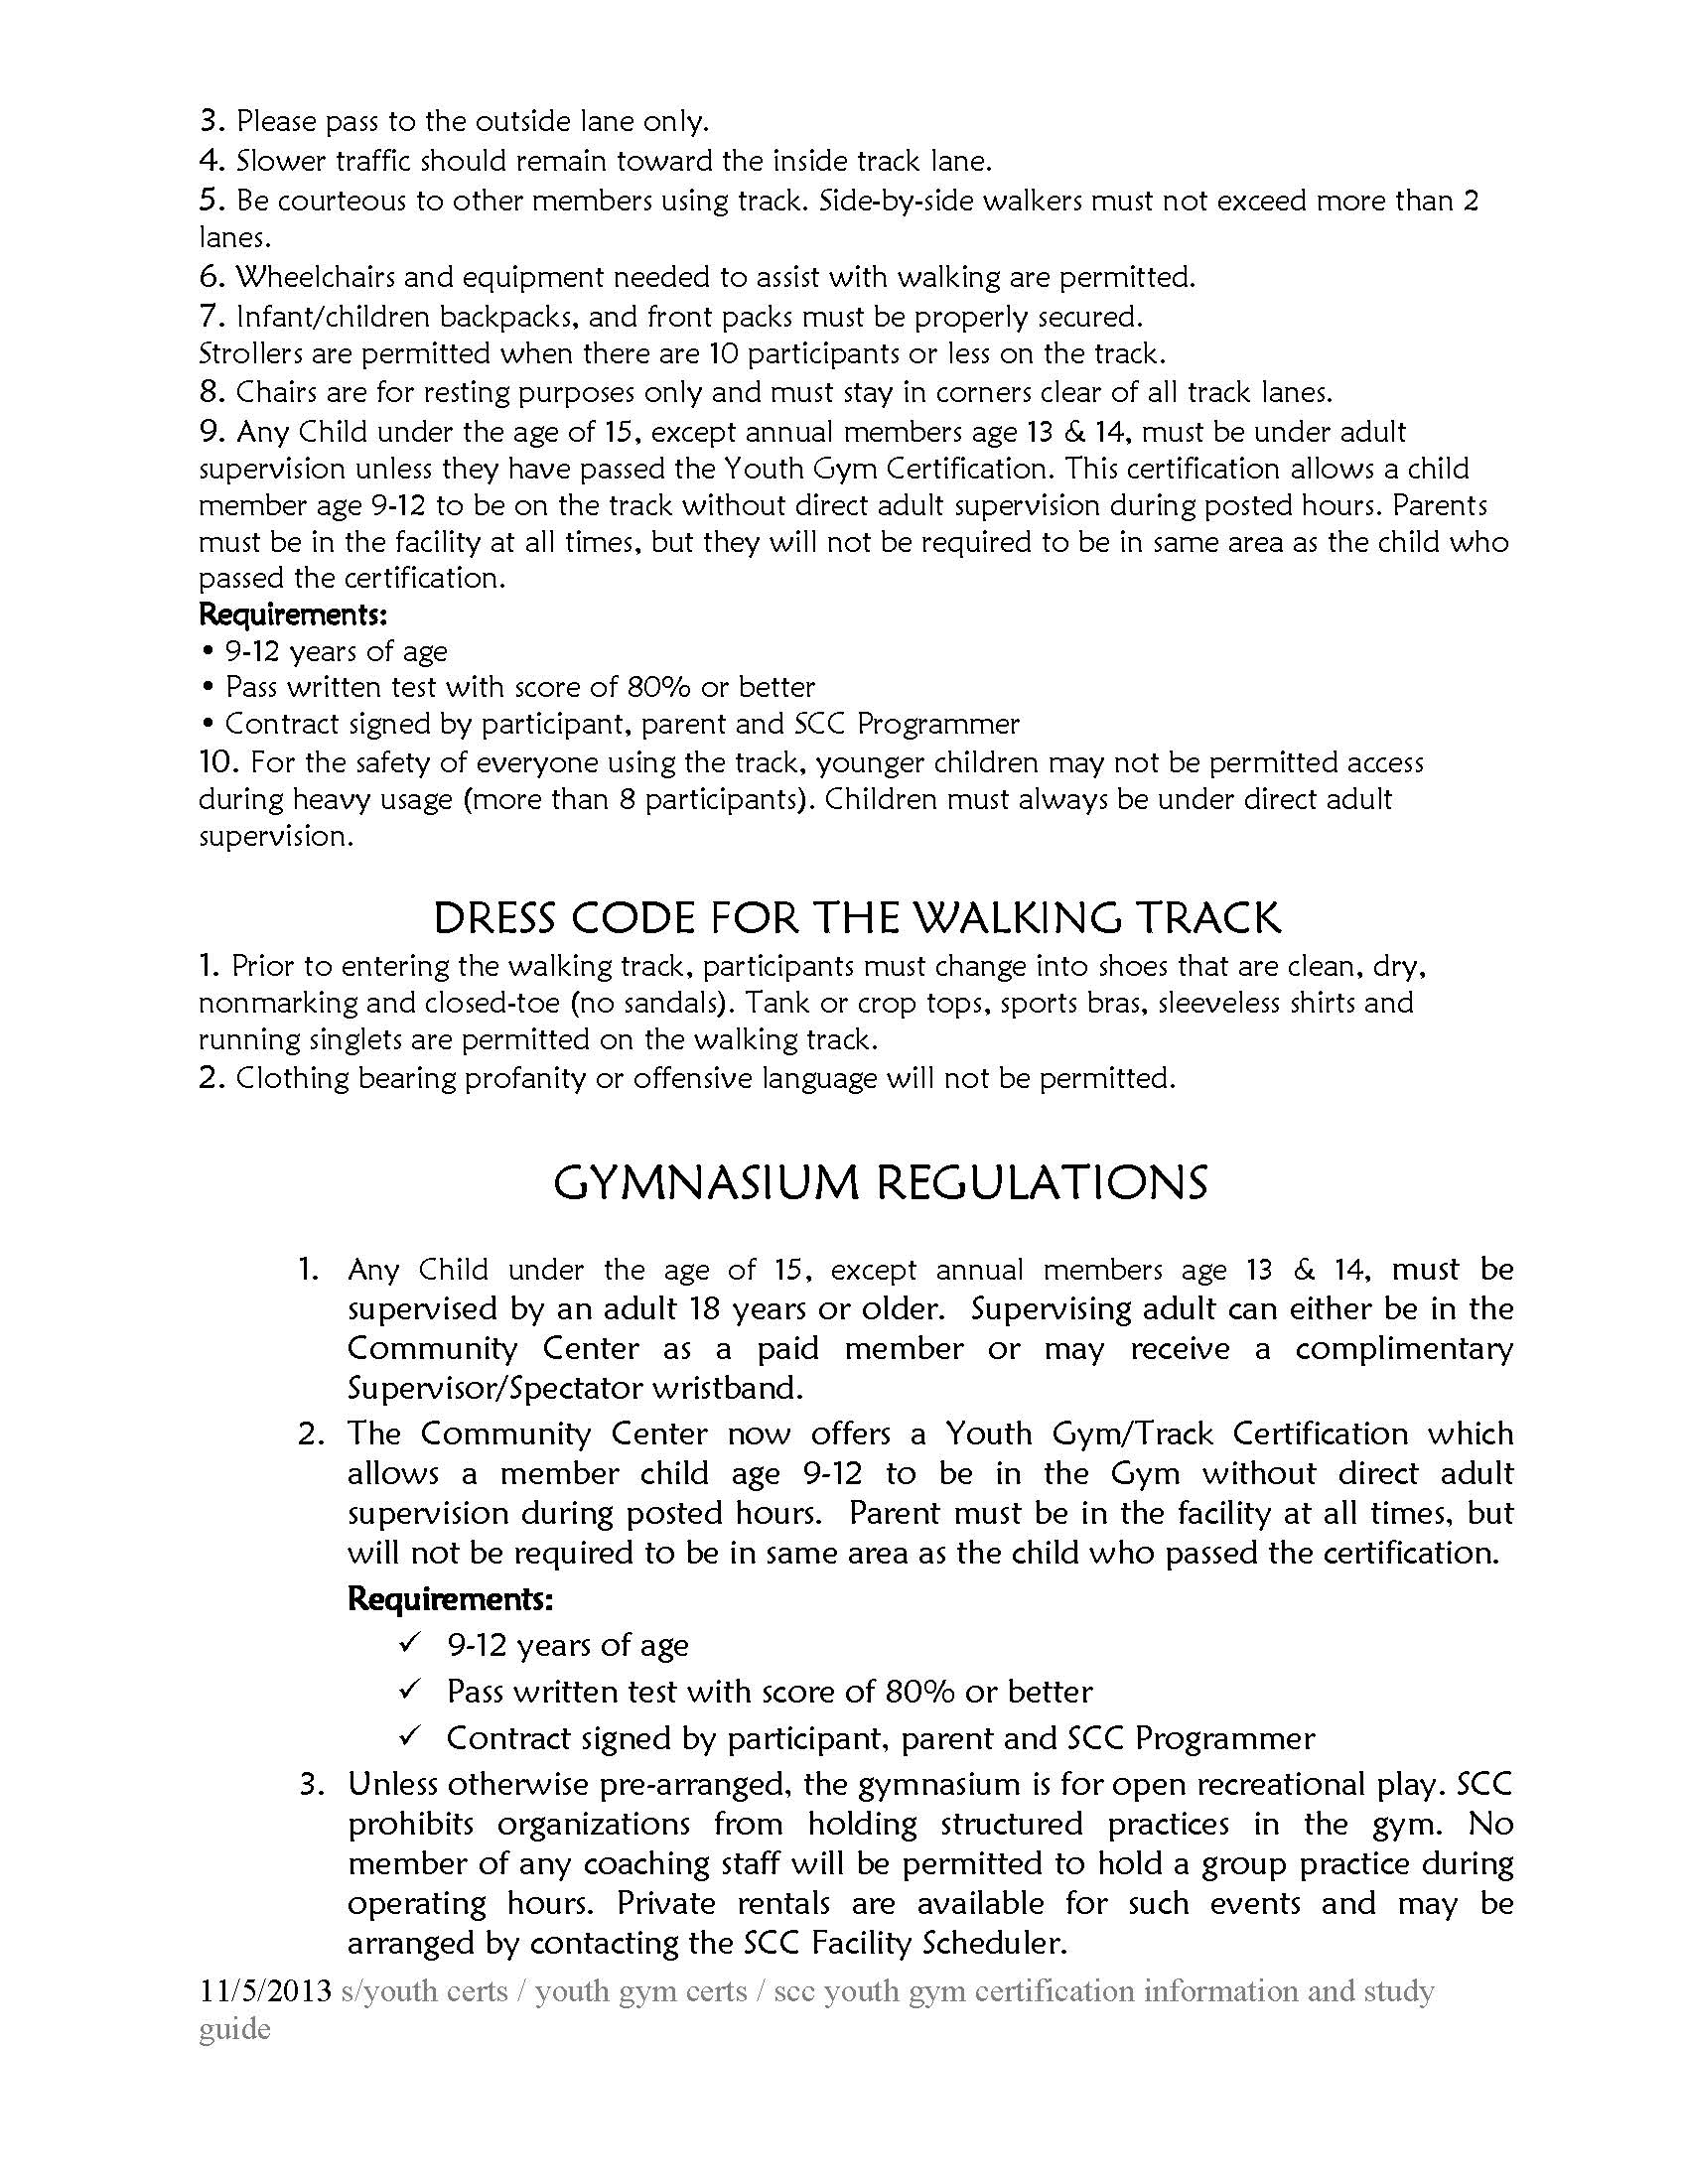 gym track certification Page 2